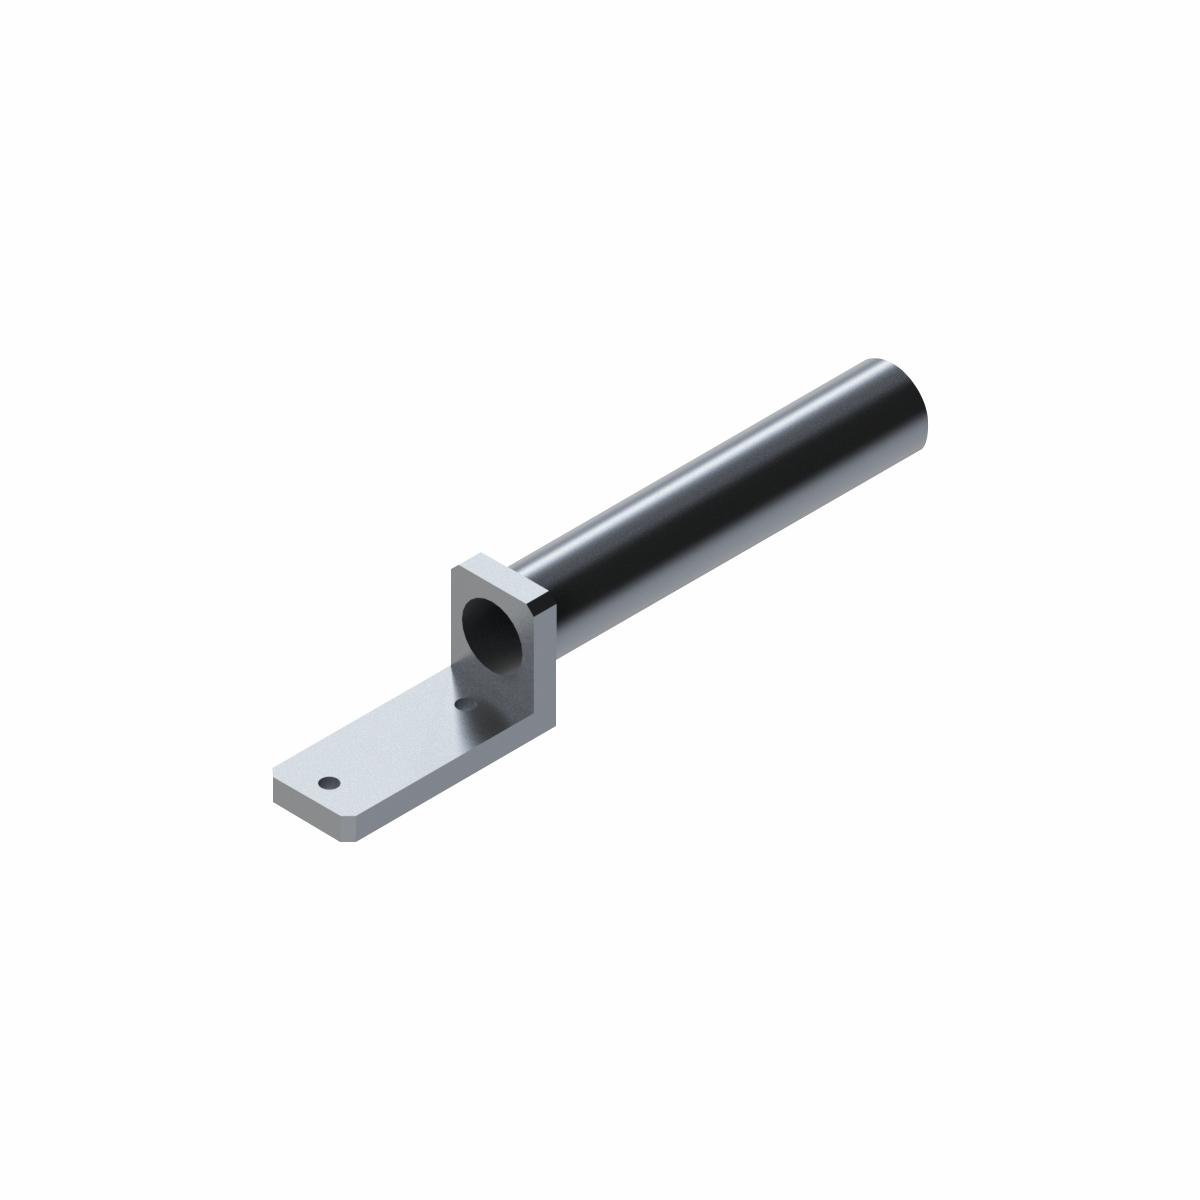 MB.ZC. – Mounting Bracket for Compact Cylinder